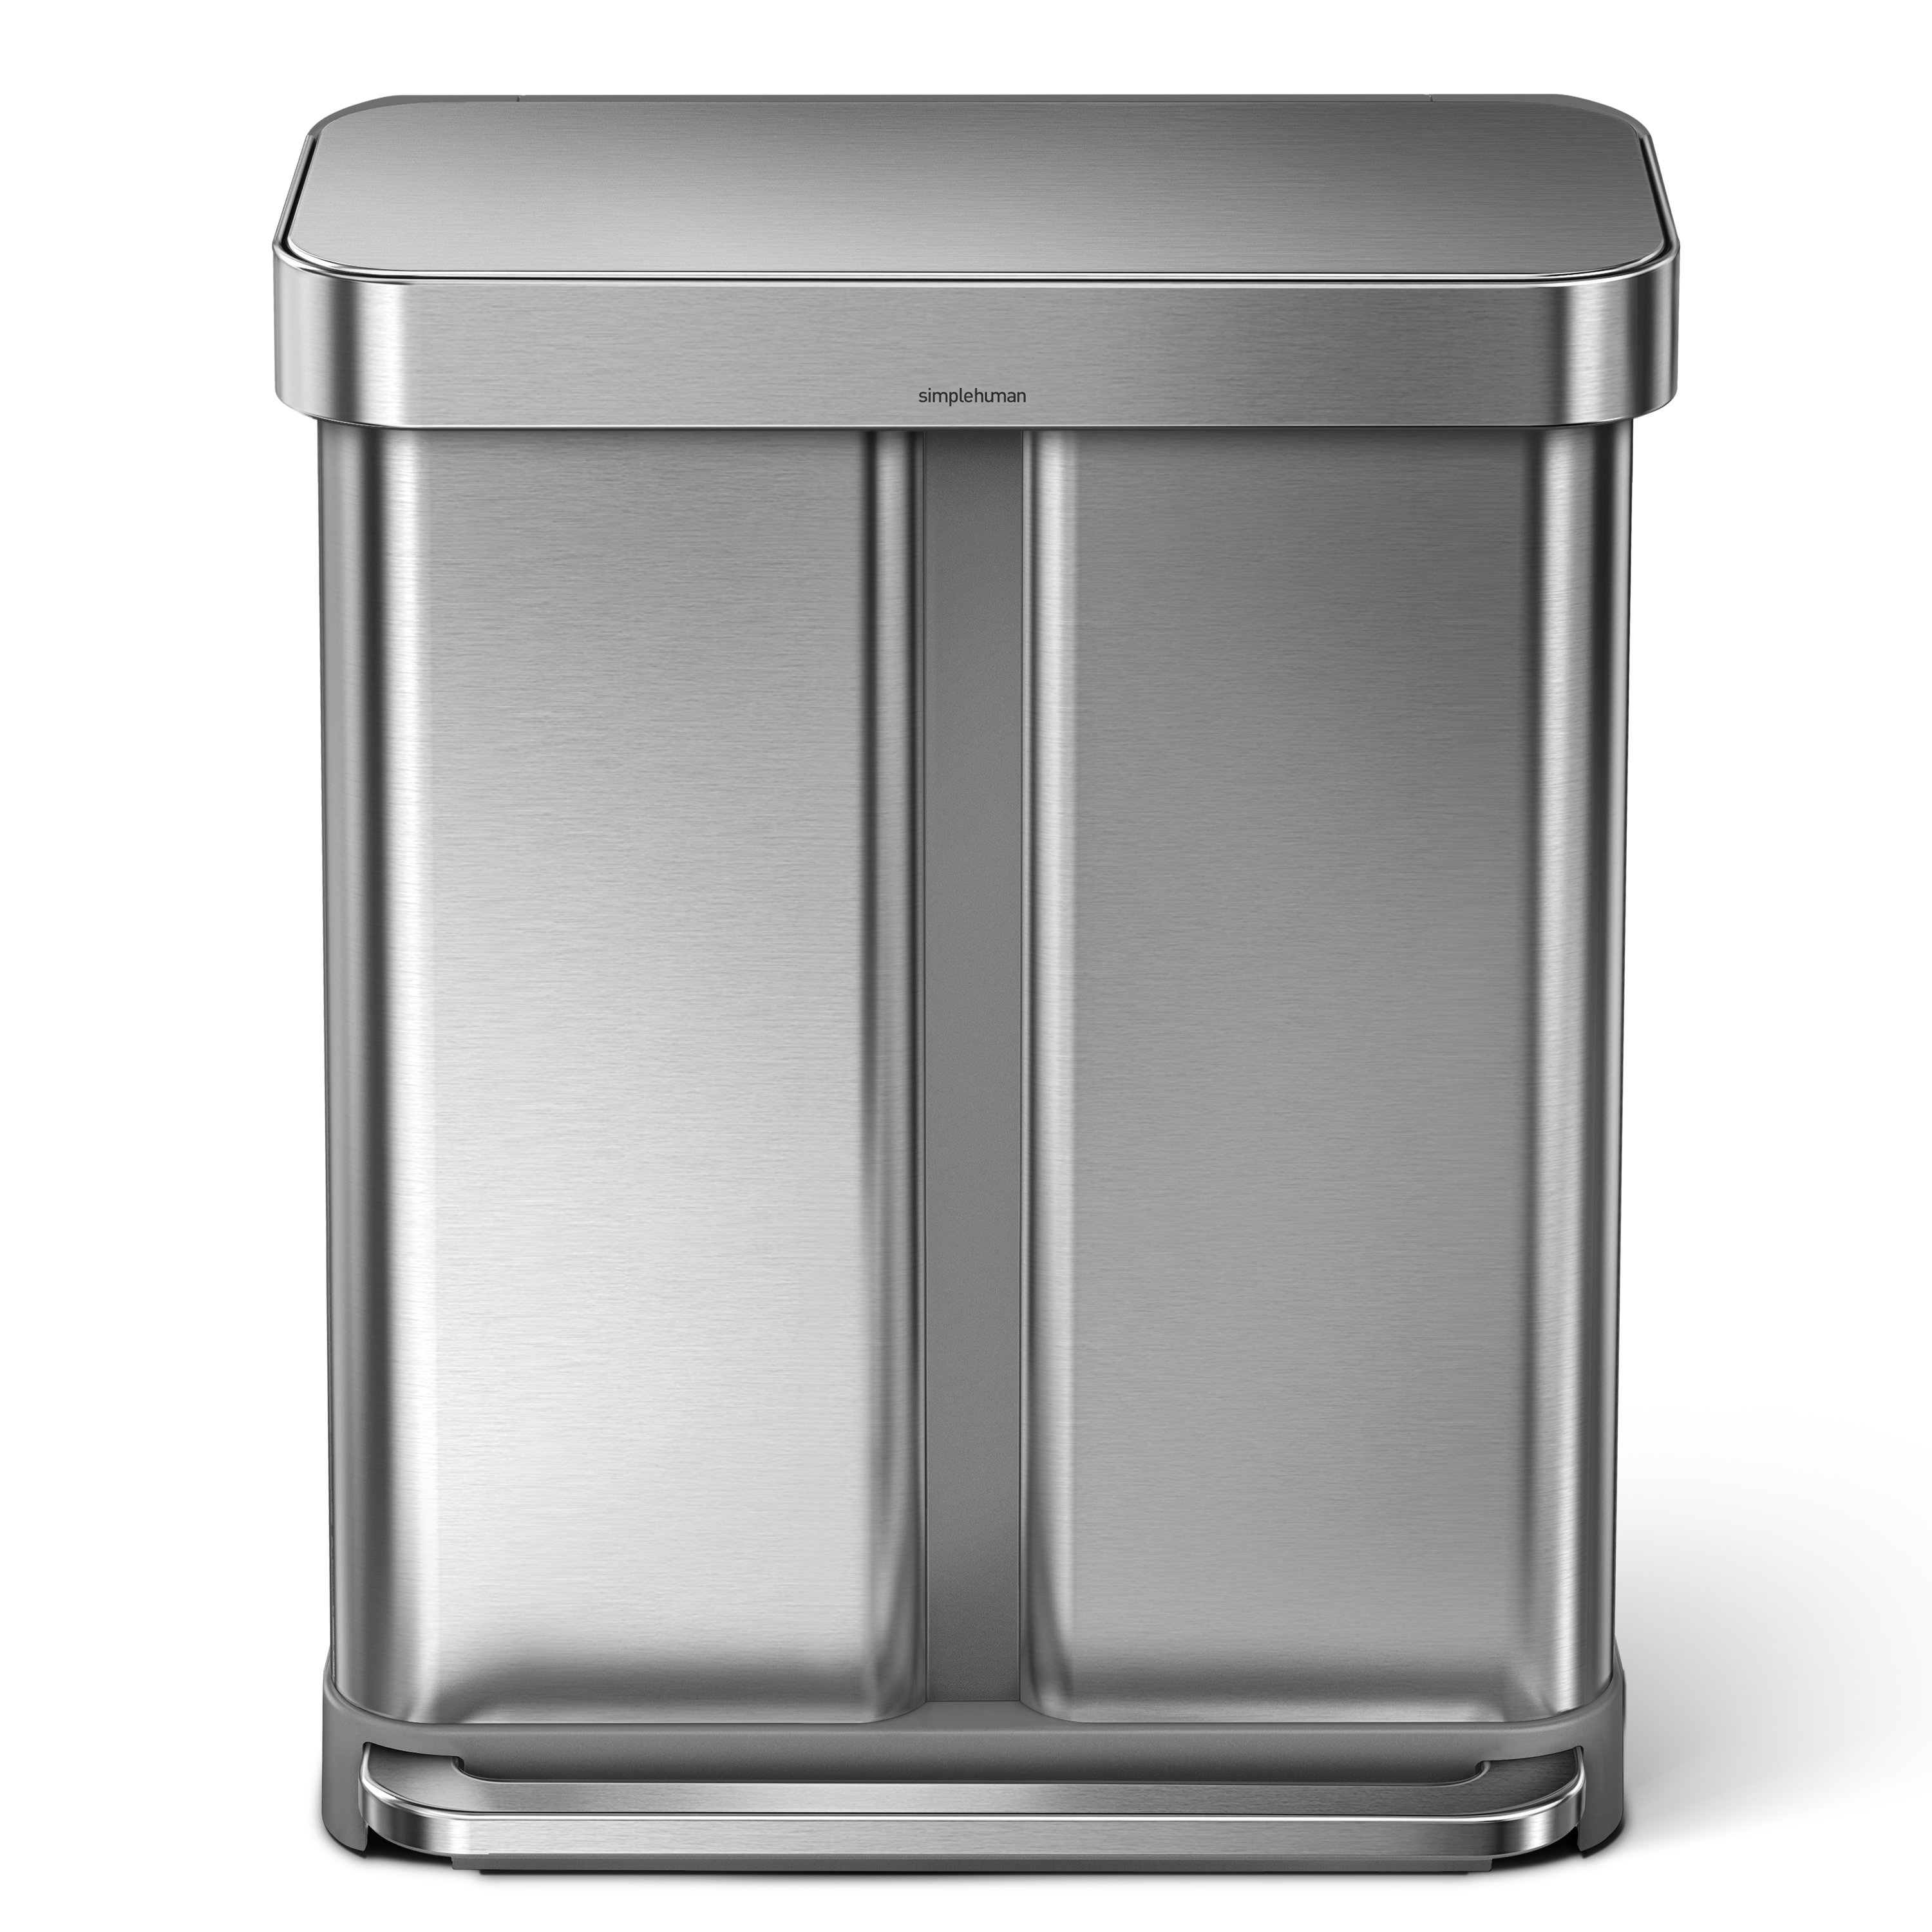 The Rise Double 30 Gal. Wall Mounted Waste Receptacles and Recycle Bins